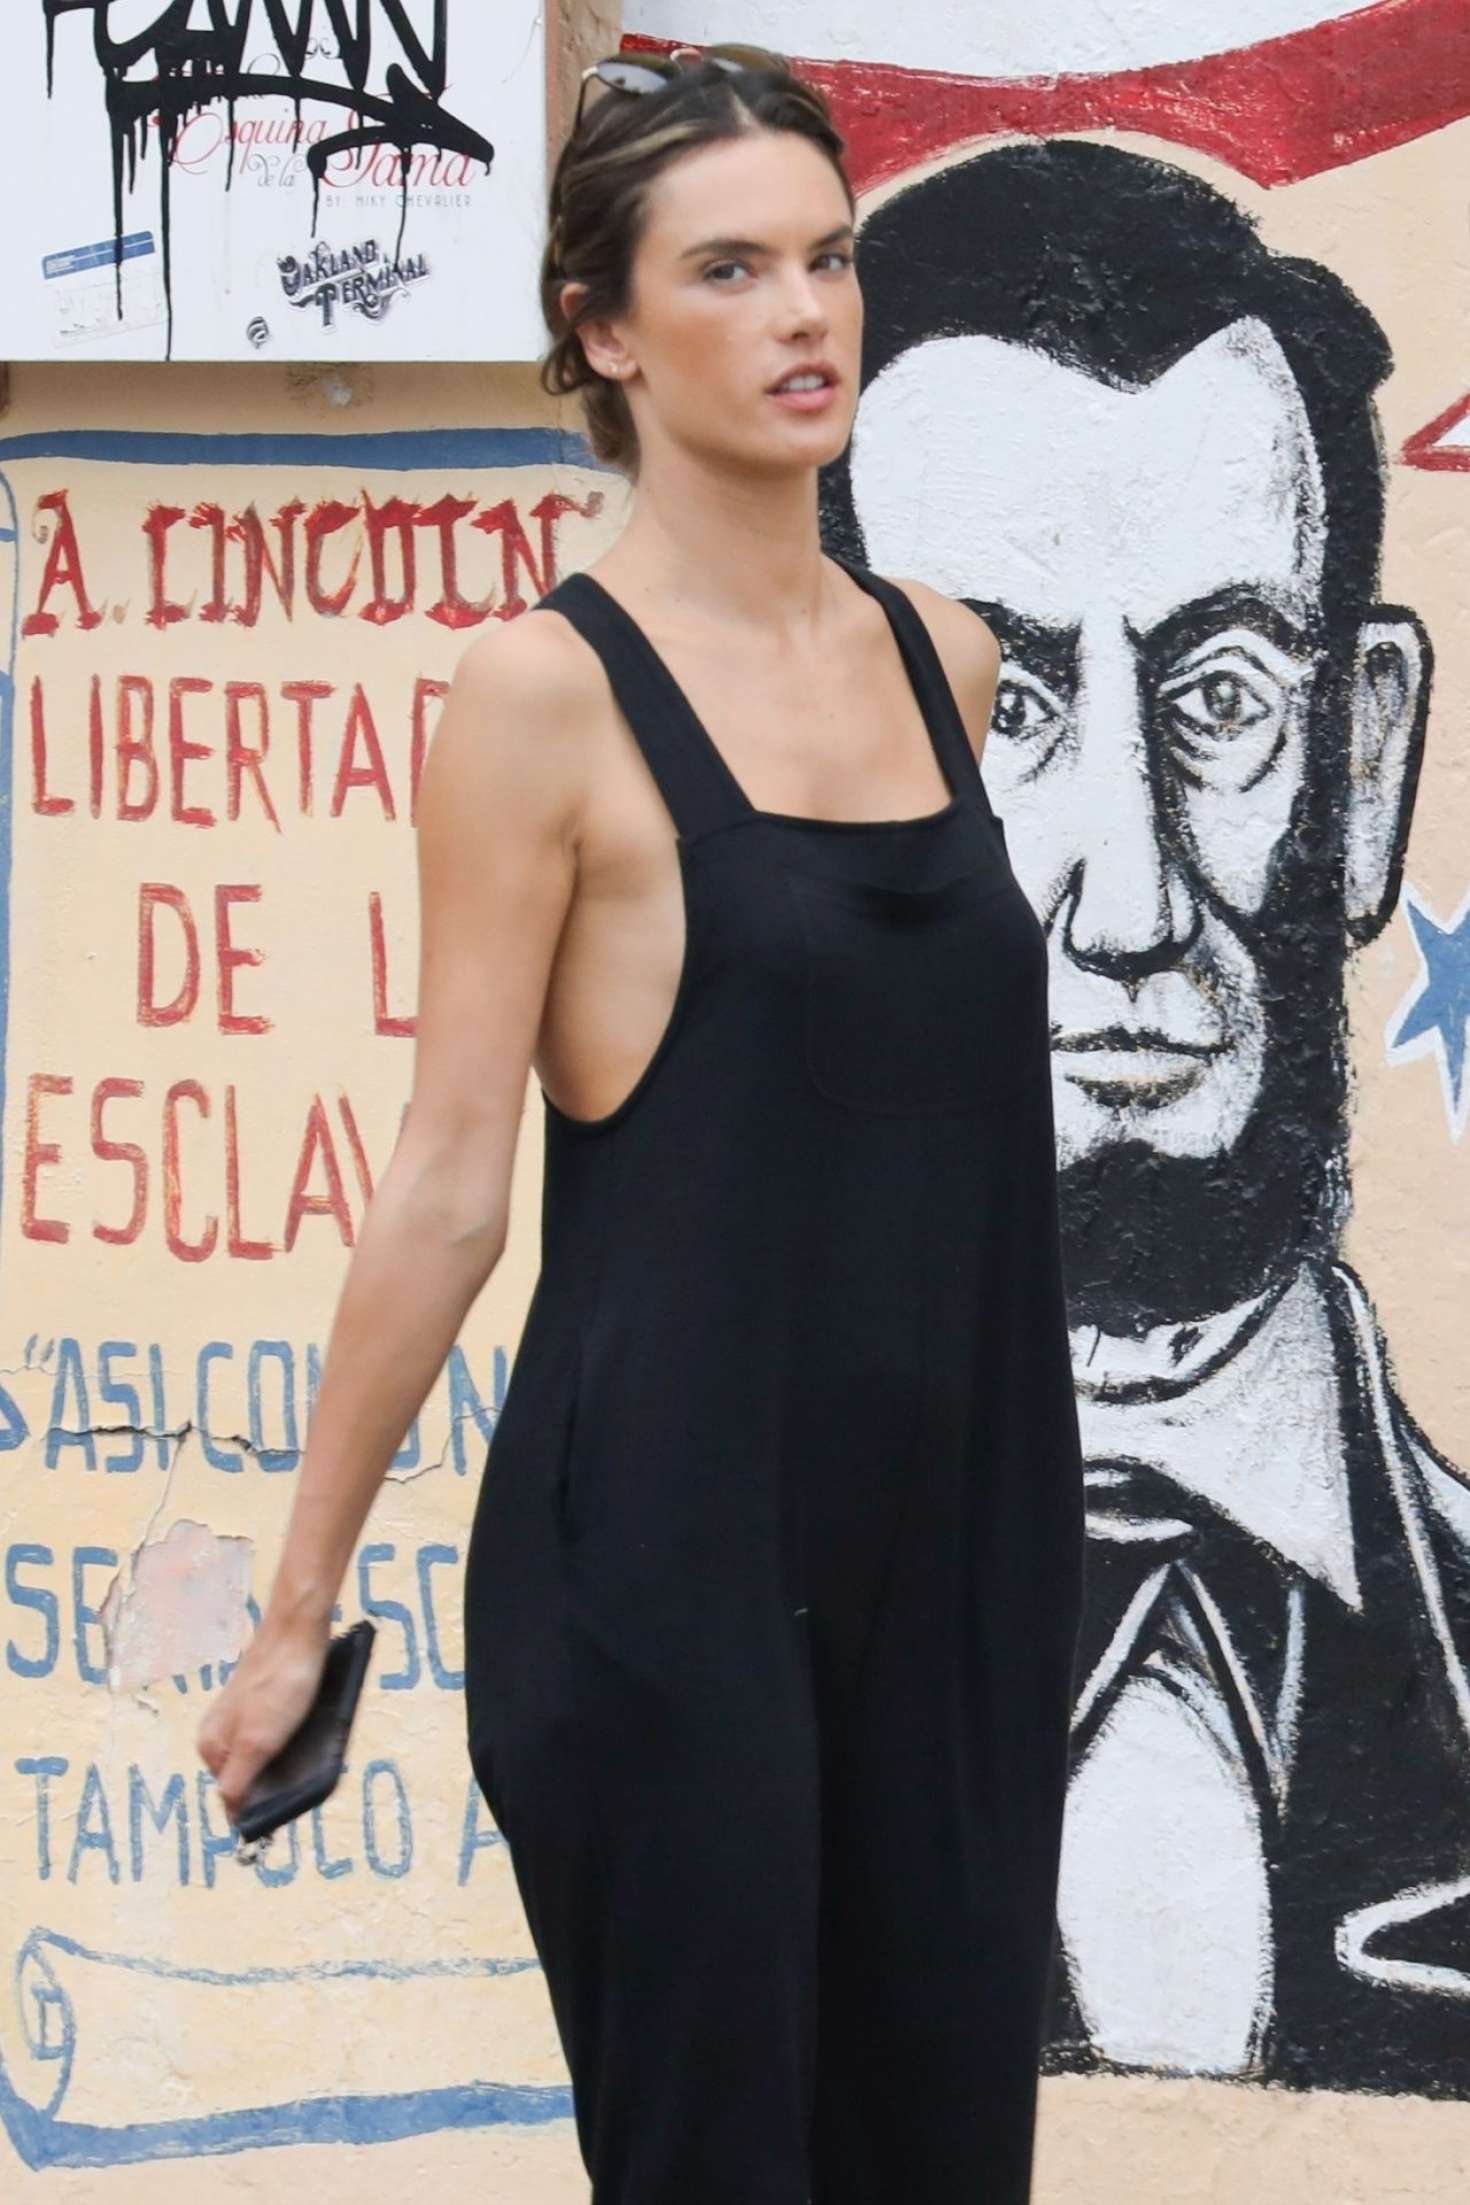 Alessandra Ambrosio at a Photoshoot for Elle Italy in Little Havana